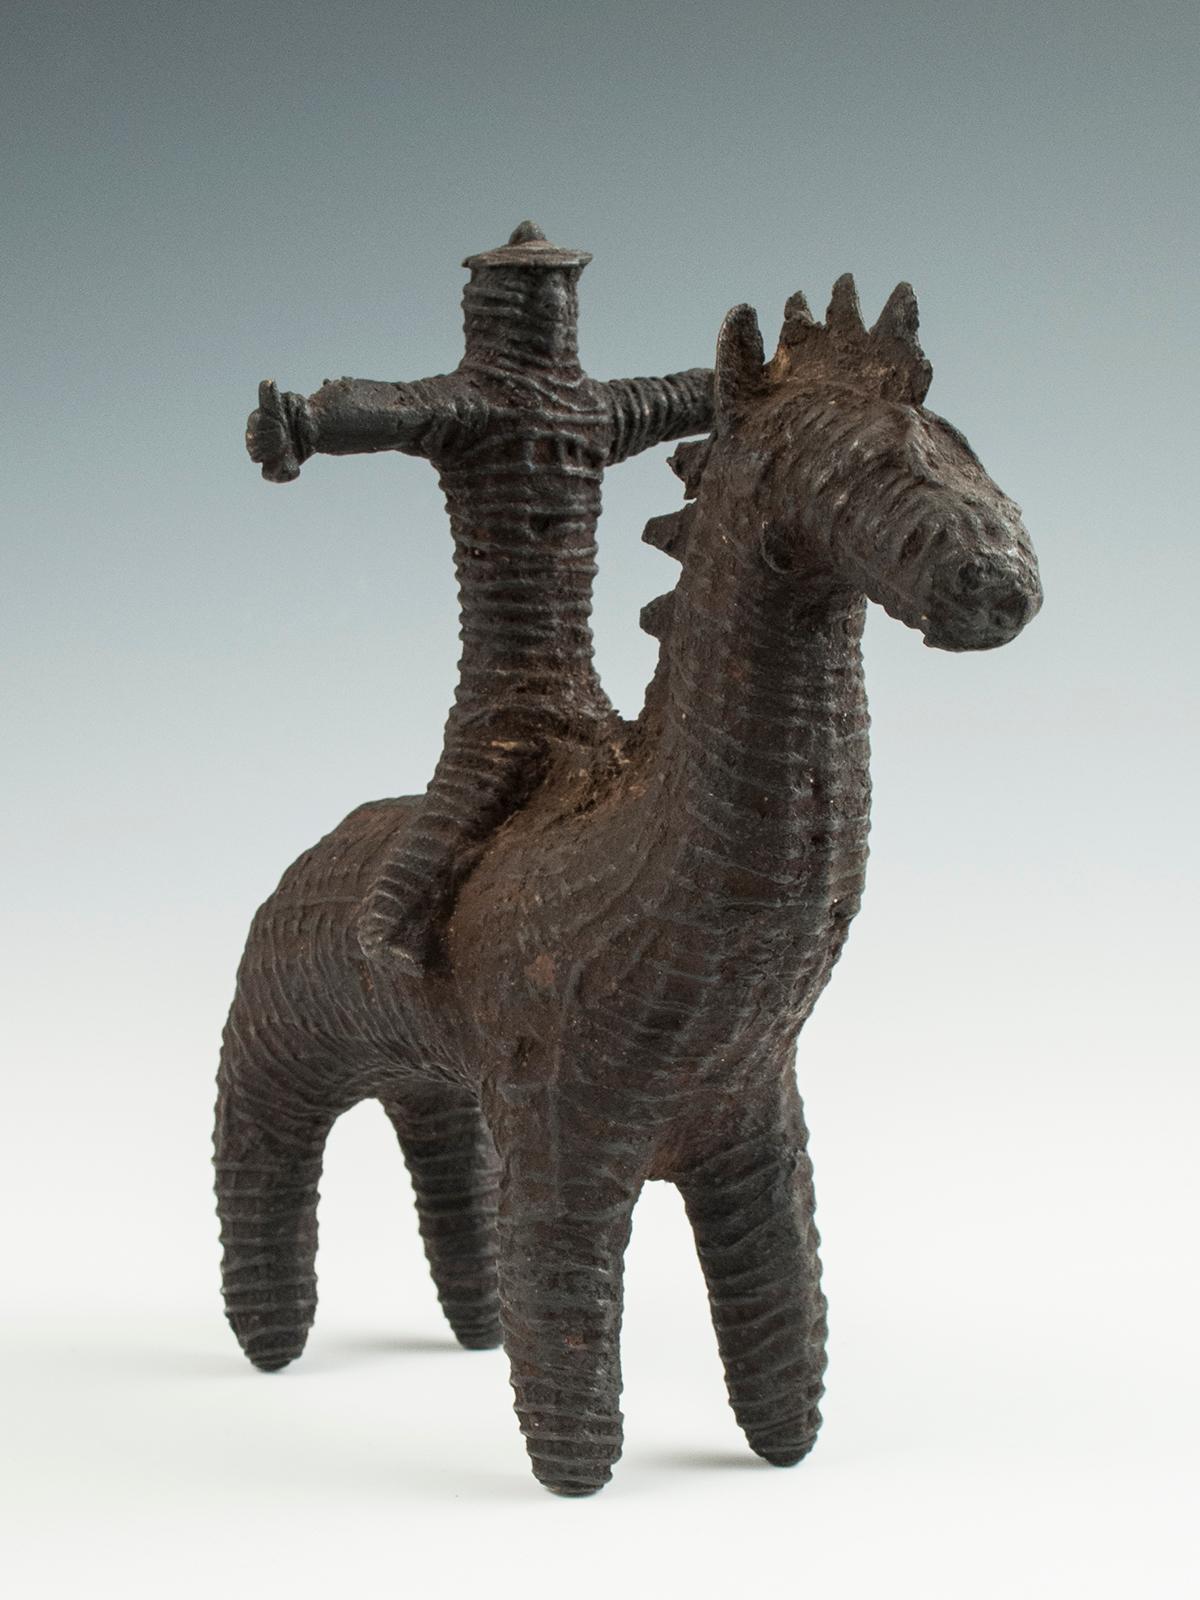 Late 19th century tribal cast bronze horse and rider, Kondh people, India

A bridal dowry sculpture in the form of a helmeted soldier riding a horse, he having the reins in one hand and a small weapon or symbol of authority in the other. Metal